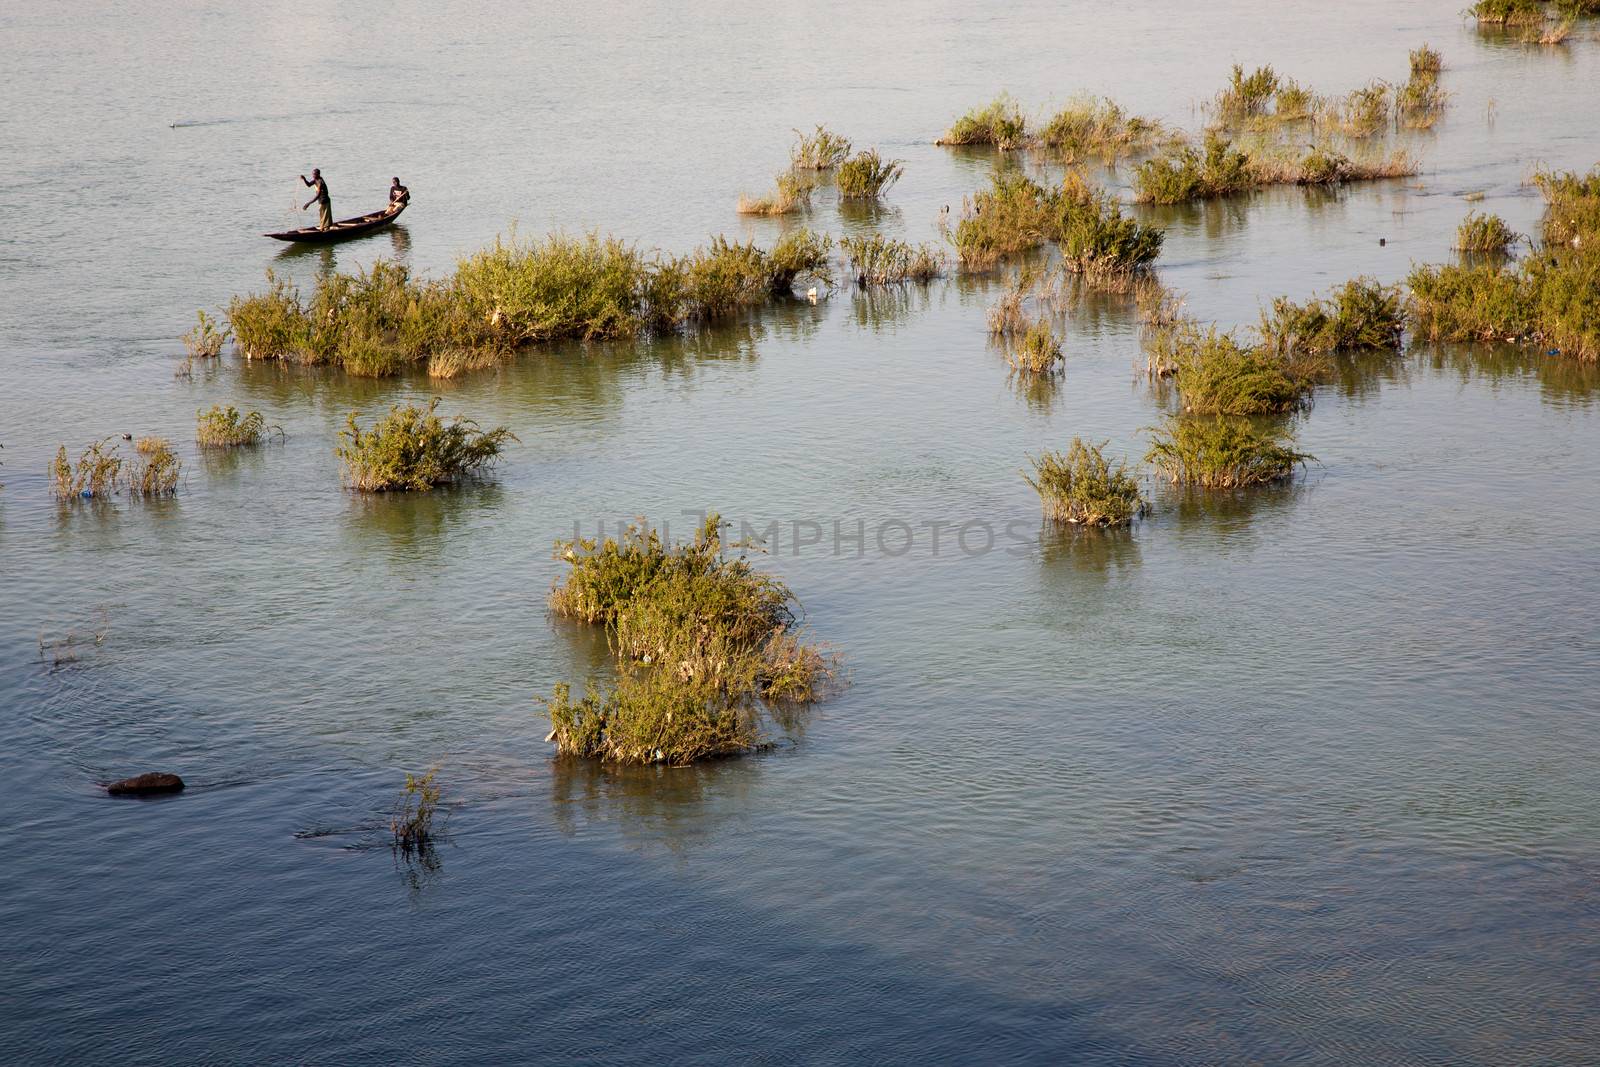 Fisher man working in their boat on the Niger River  by watchtheworld